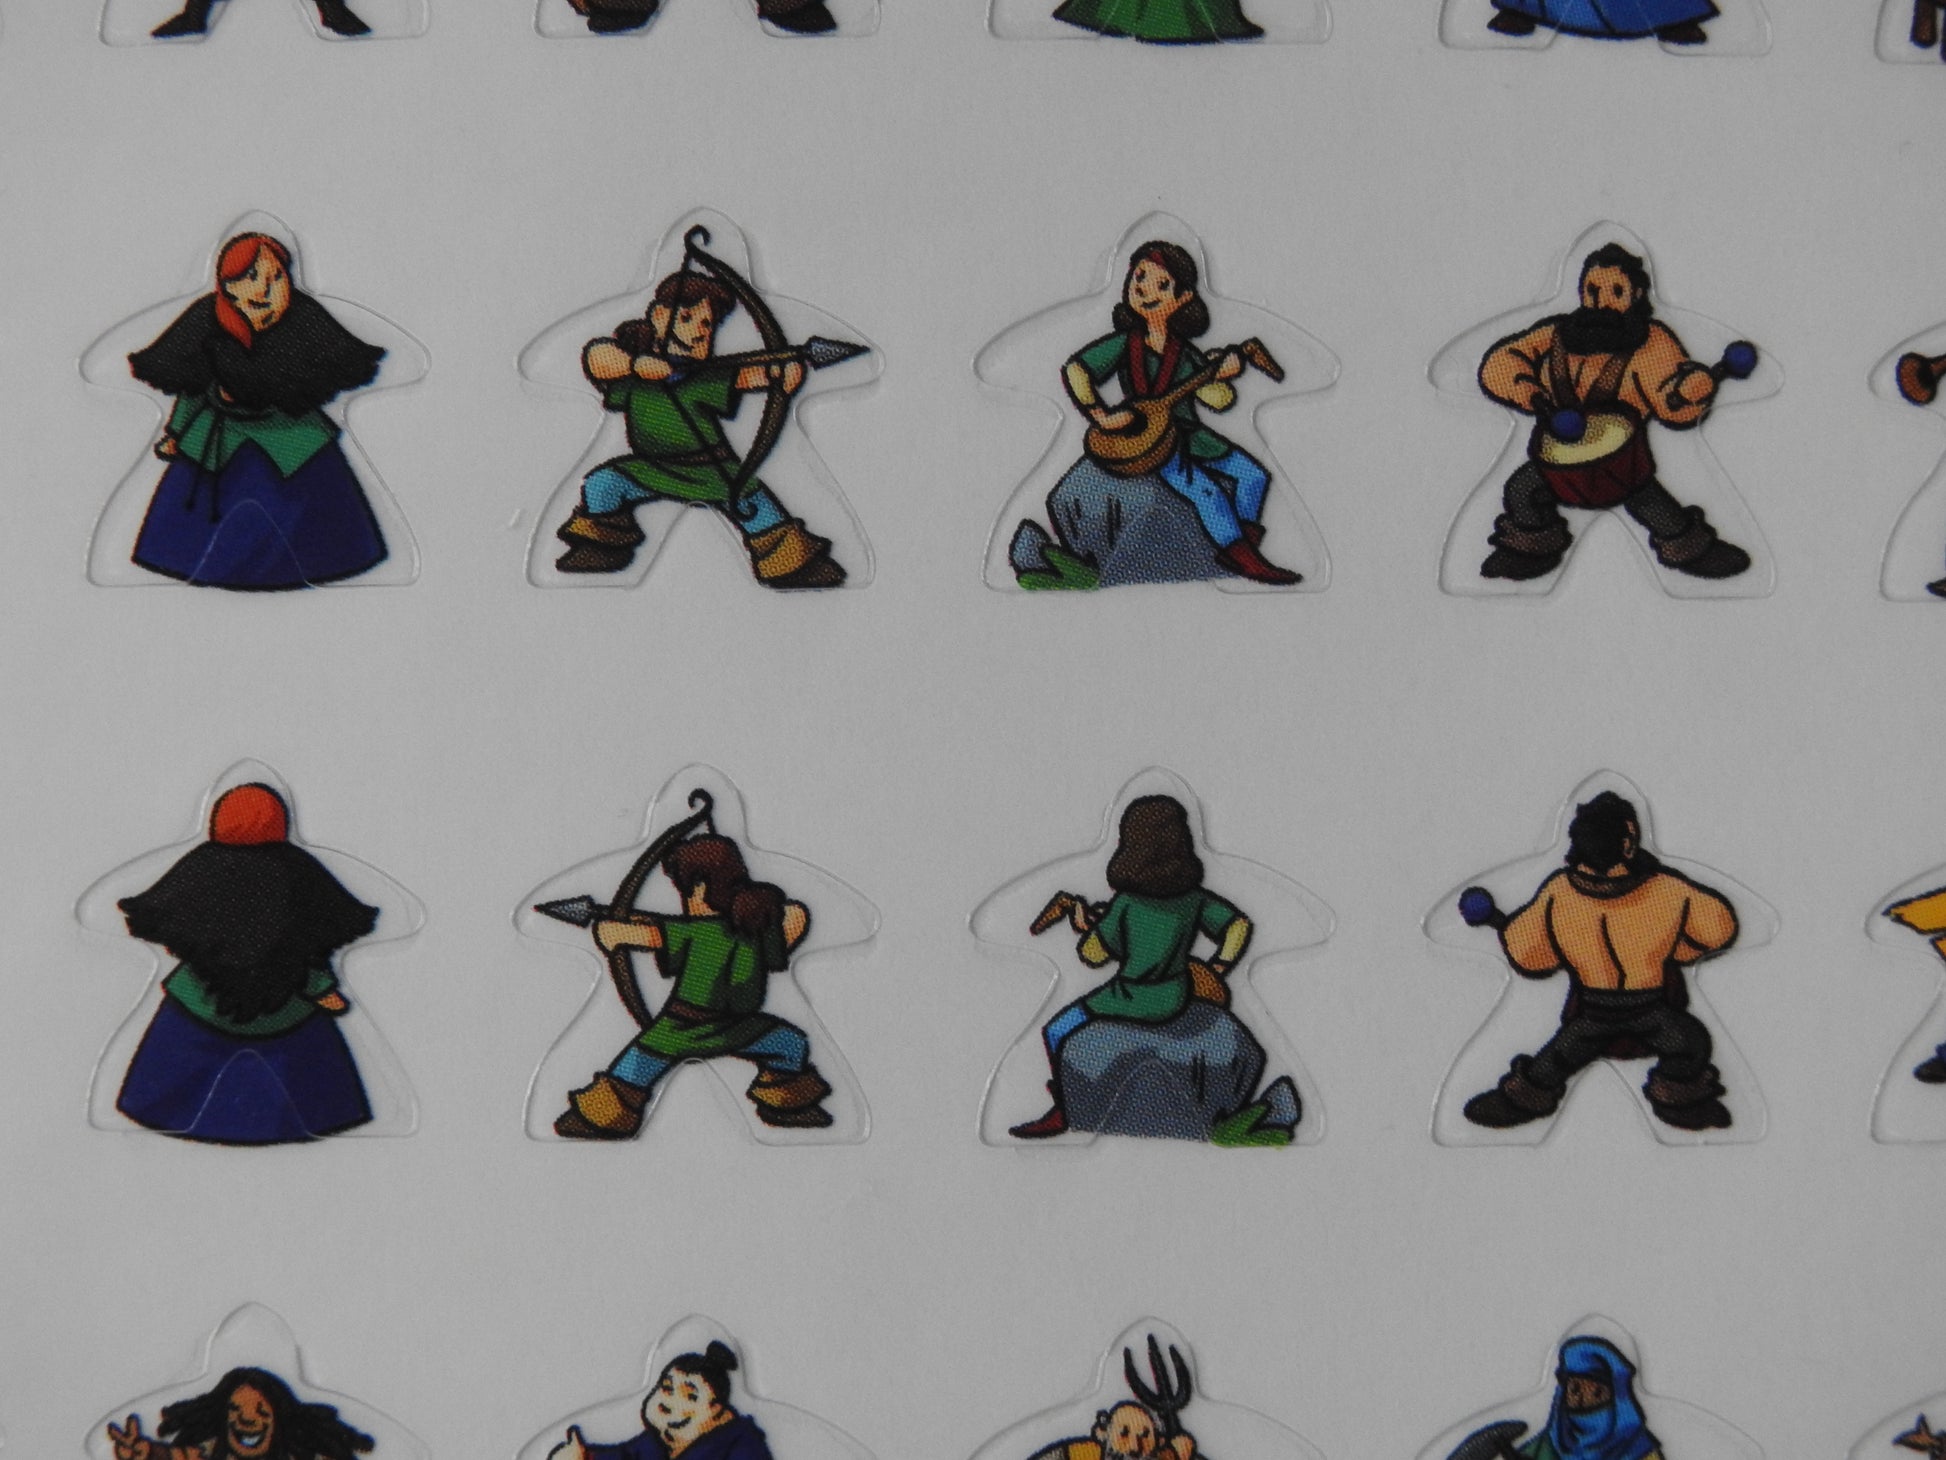 Close-up view of some of the meeple stickers, including an archer, a musician and a drummer.